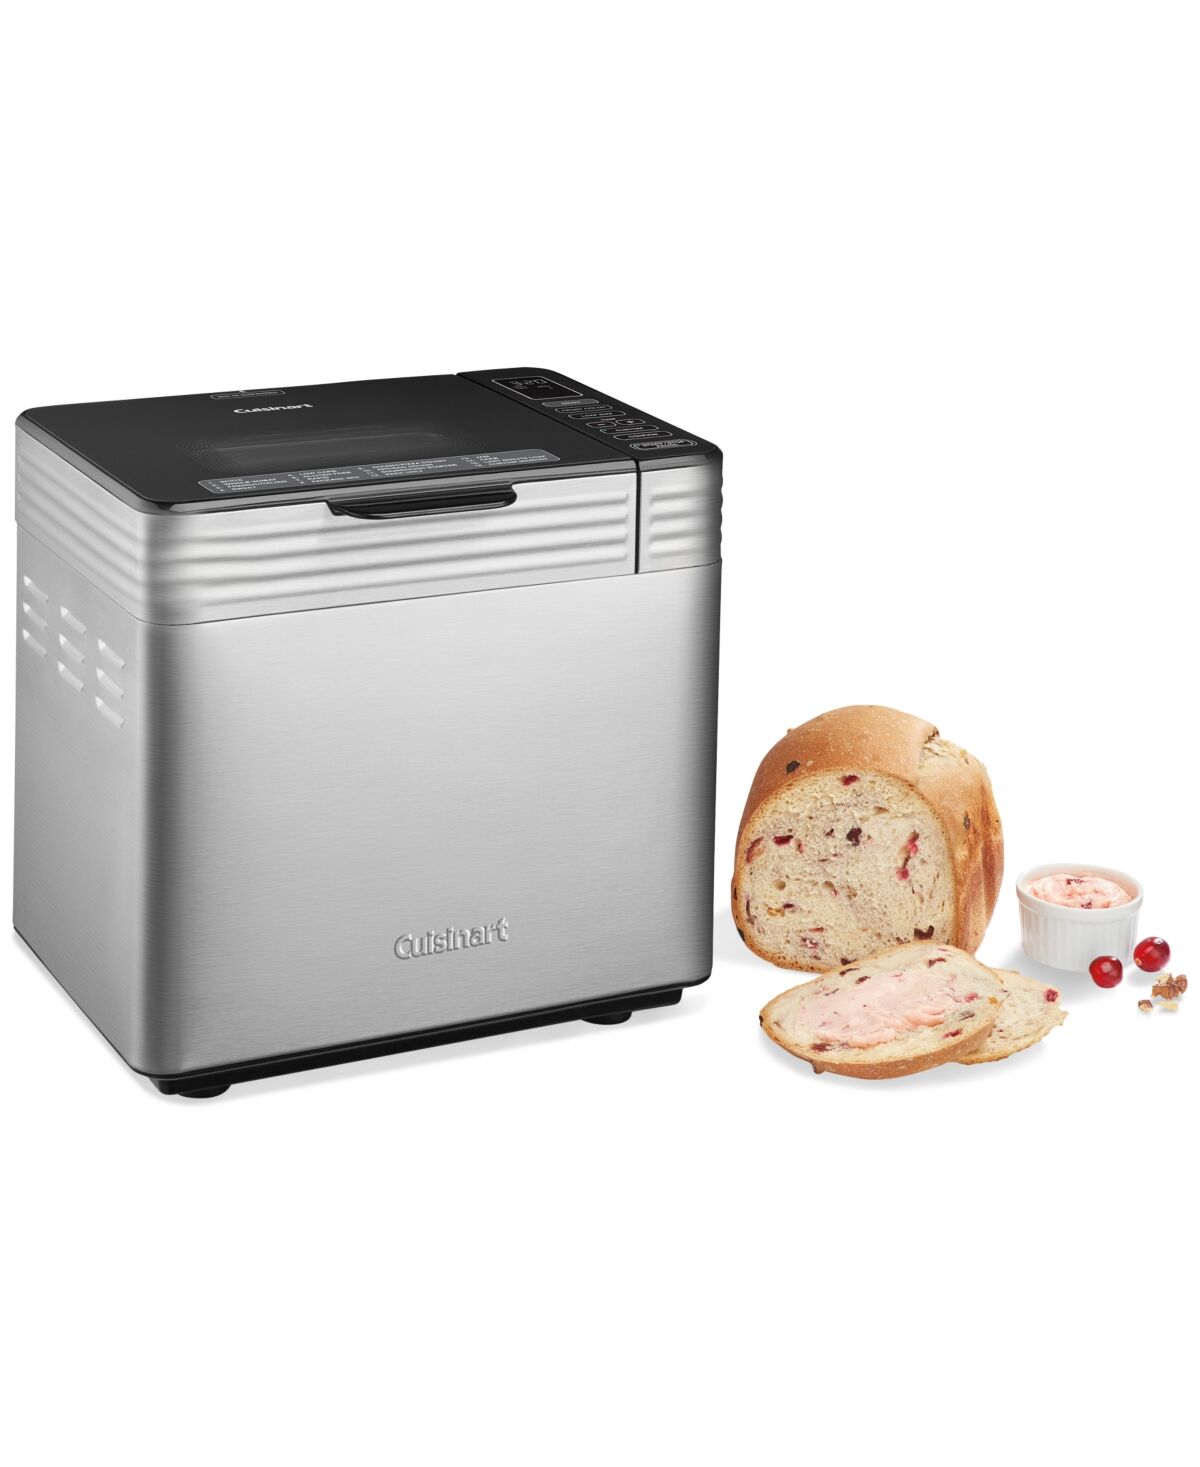 Cuisinart Custom Convection 2 Lb. Loaf Bread Maker - Stainless Steel